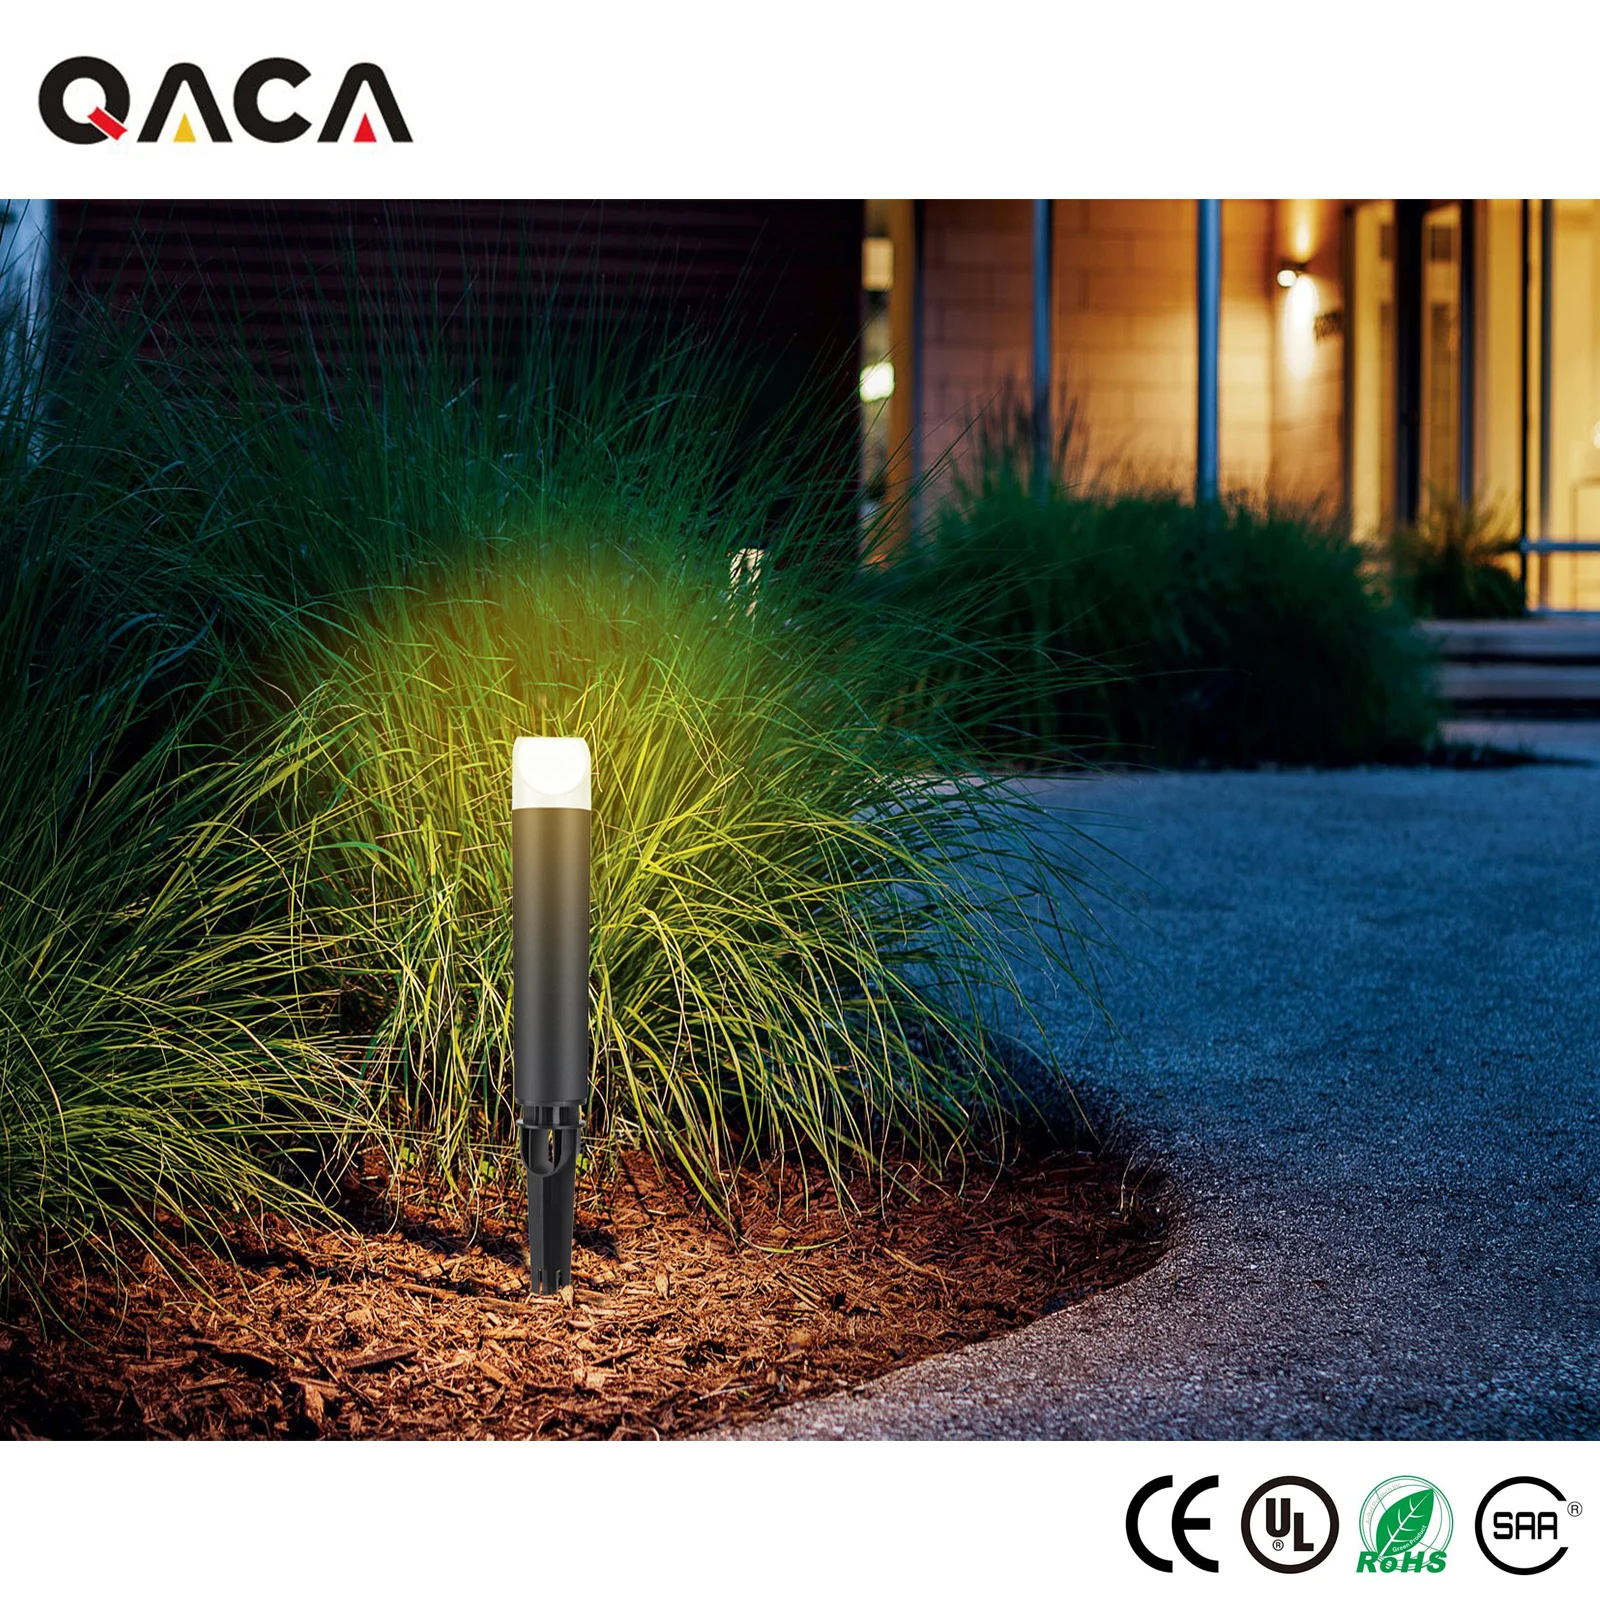  LED Garden Lights Outdoor,Yard scape Lawn Lighting,DC12V 5W IP65 Waterproof Sup - £166.44 GBP